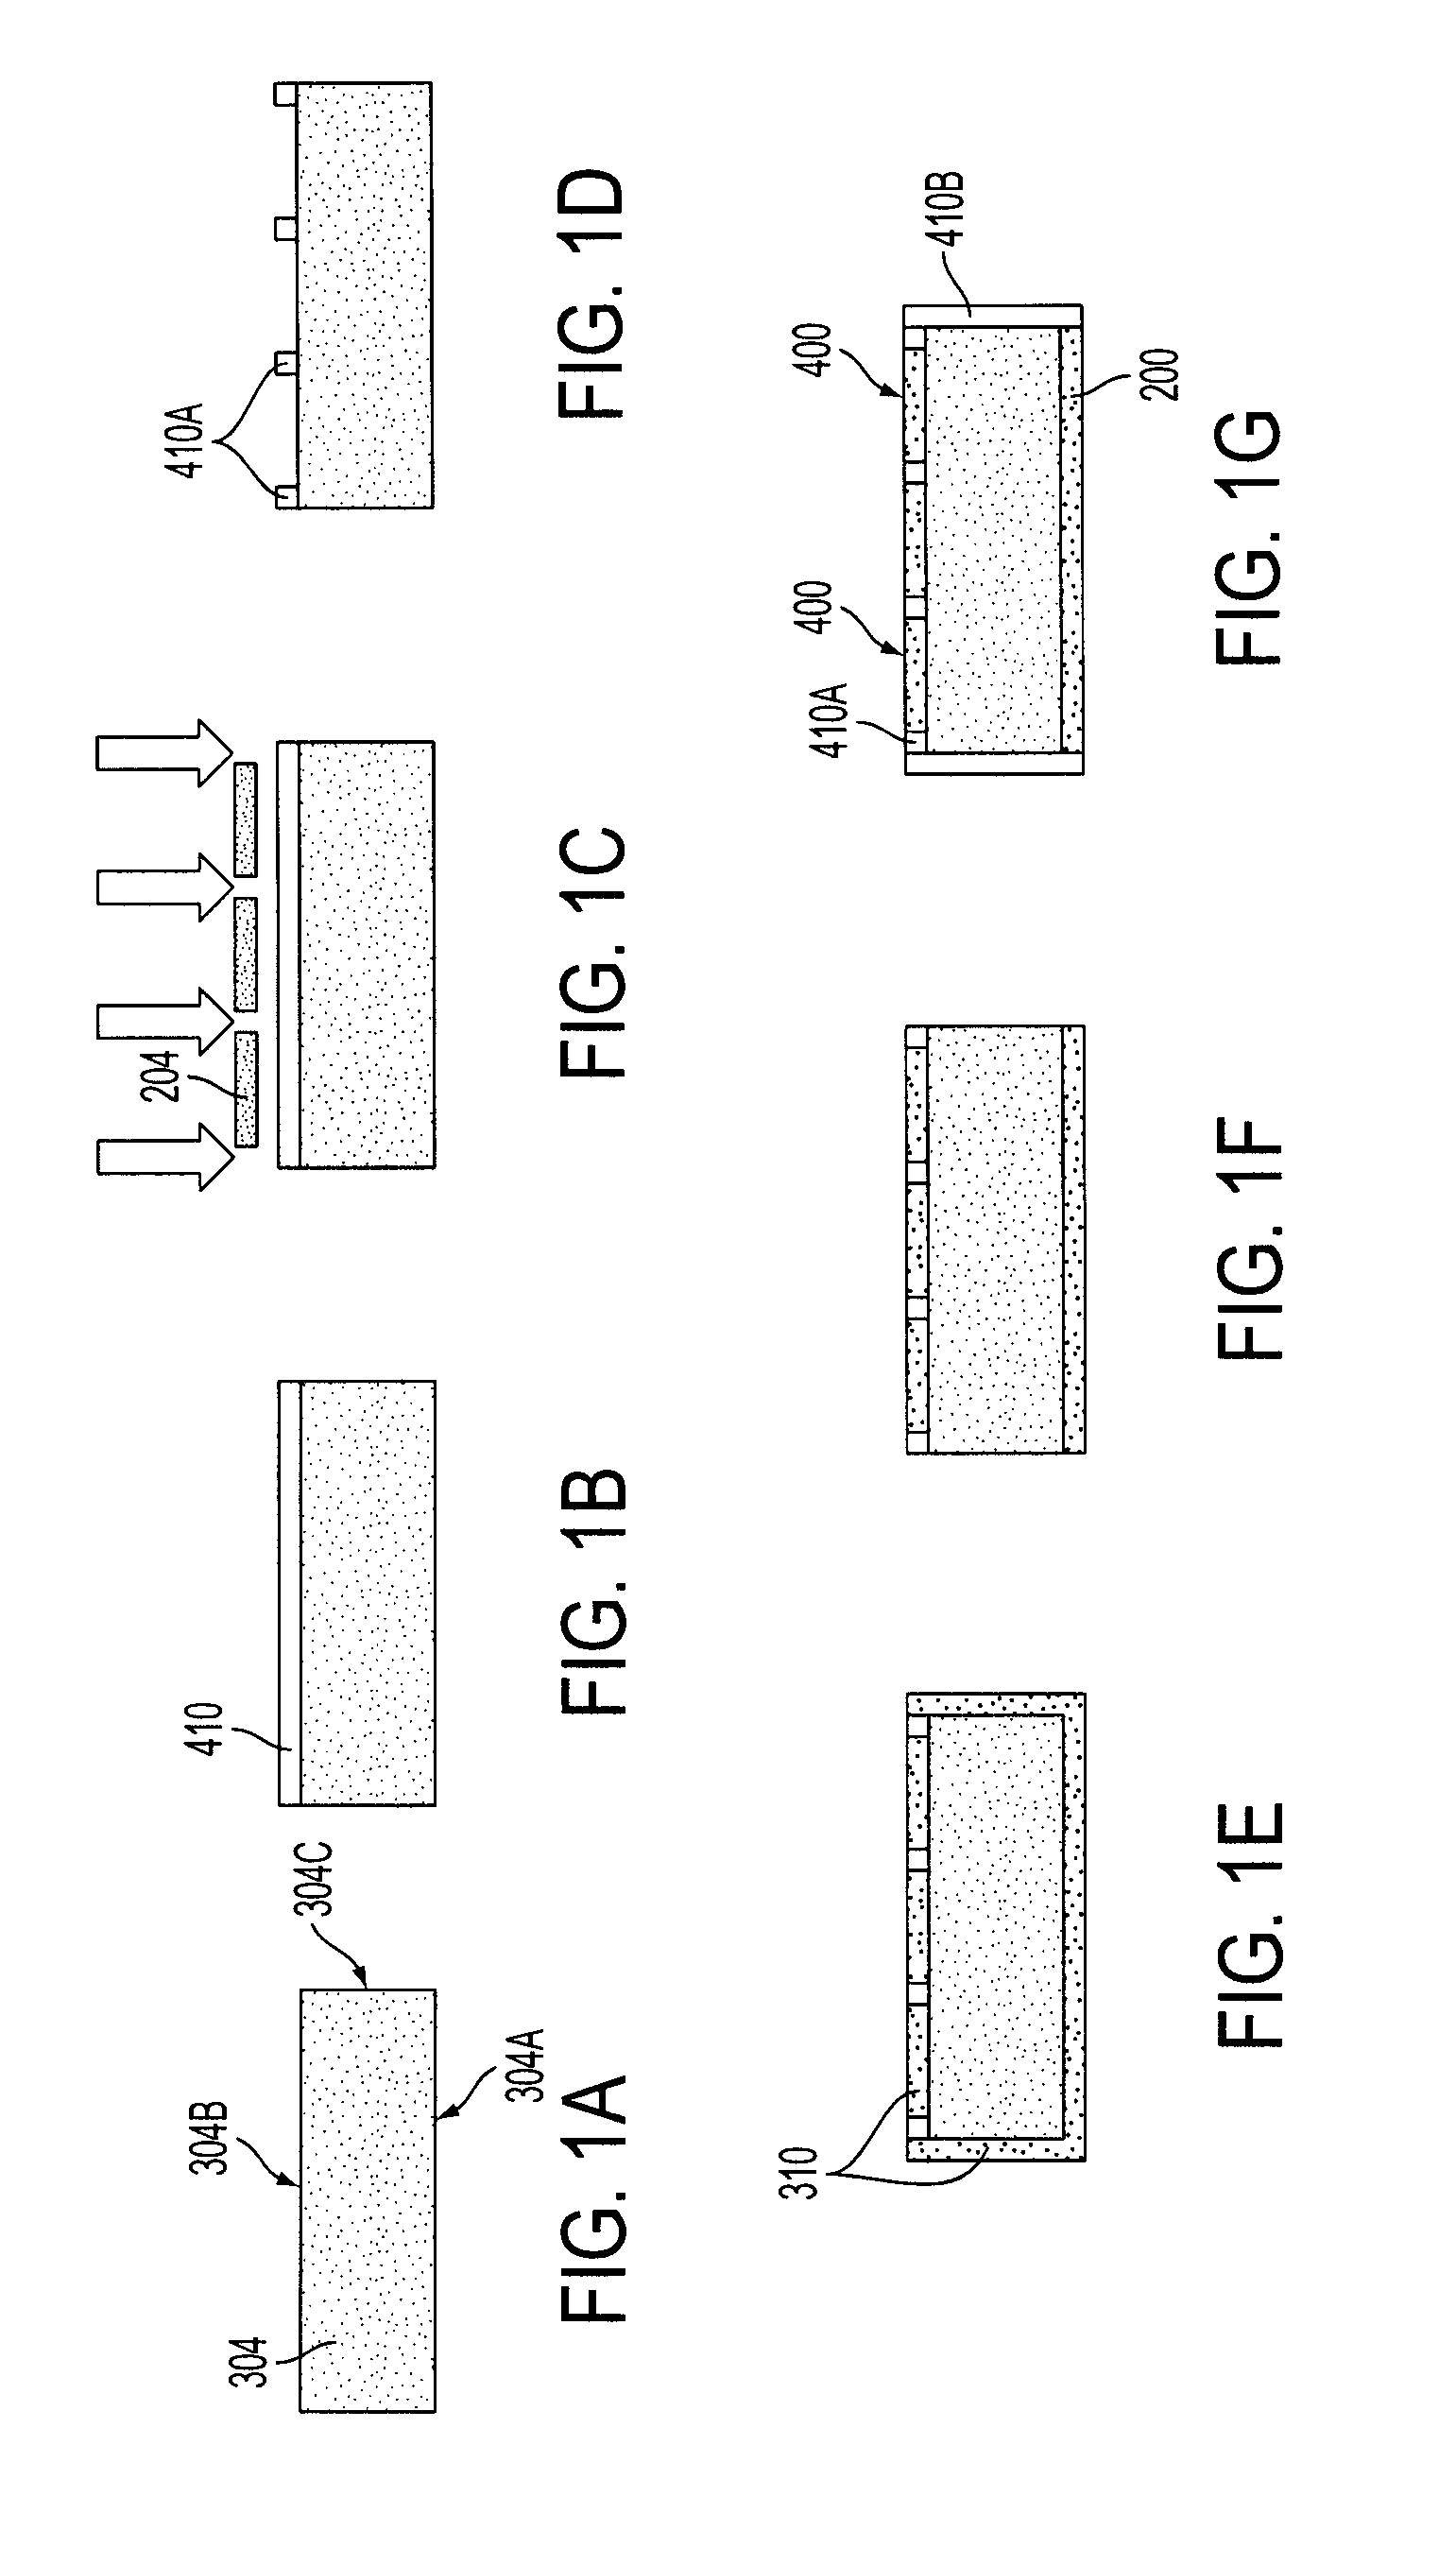 Method of fabricating patterned CZT and CdTe devices